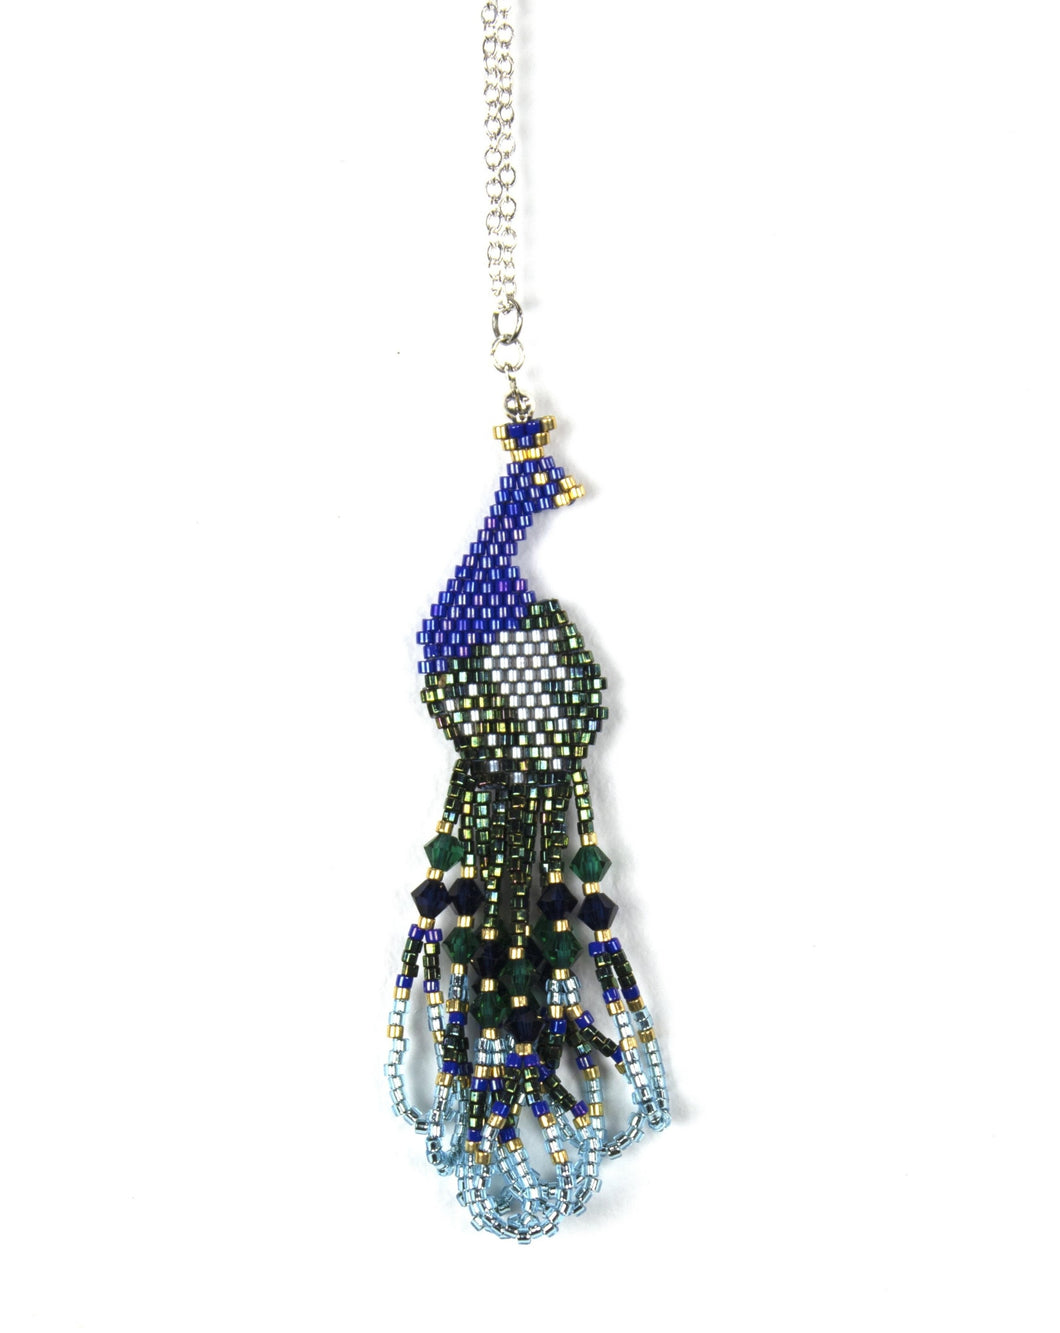 Alicia Wiese, Peacock Necklace